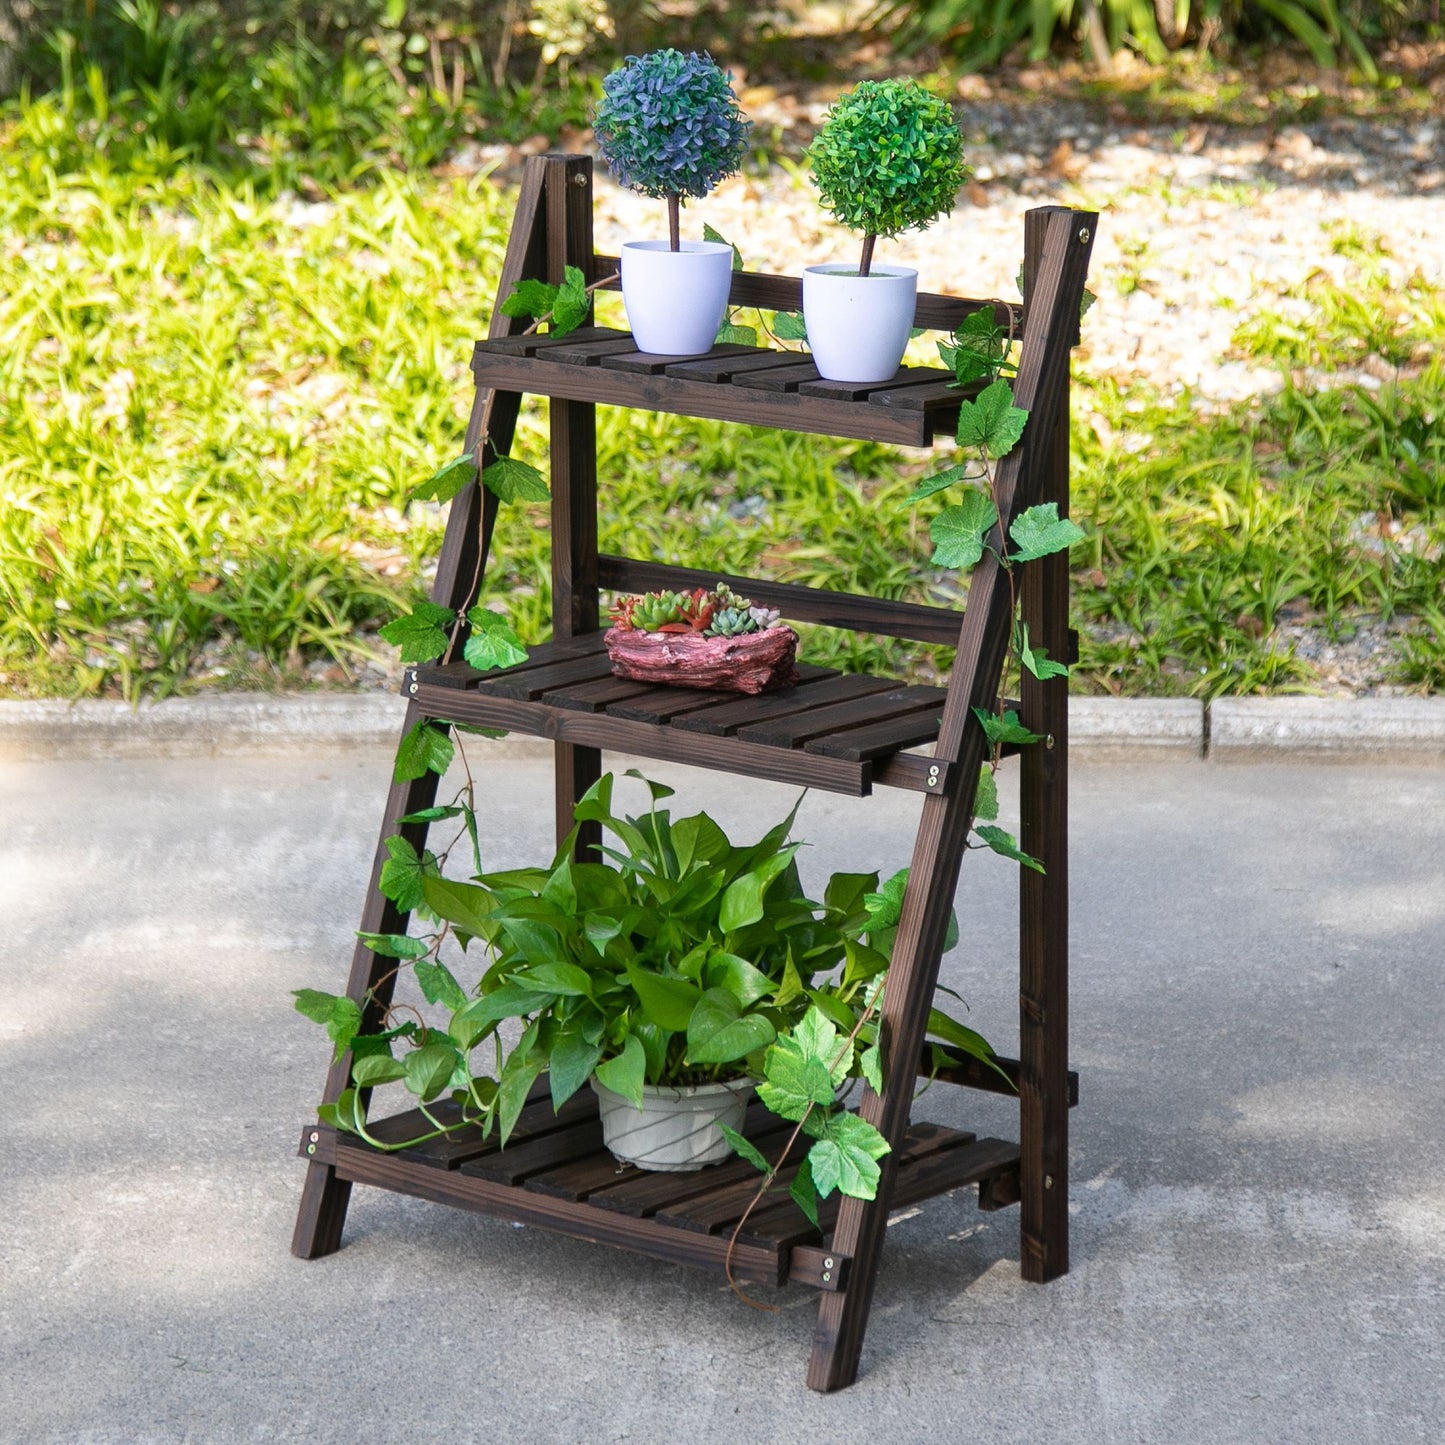 Outsunny 3-Tier Wooden Plant Shelf Foldable Flower Pots Holder Stand Indoor Outdoor